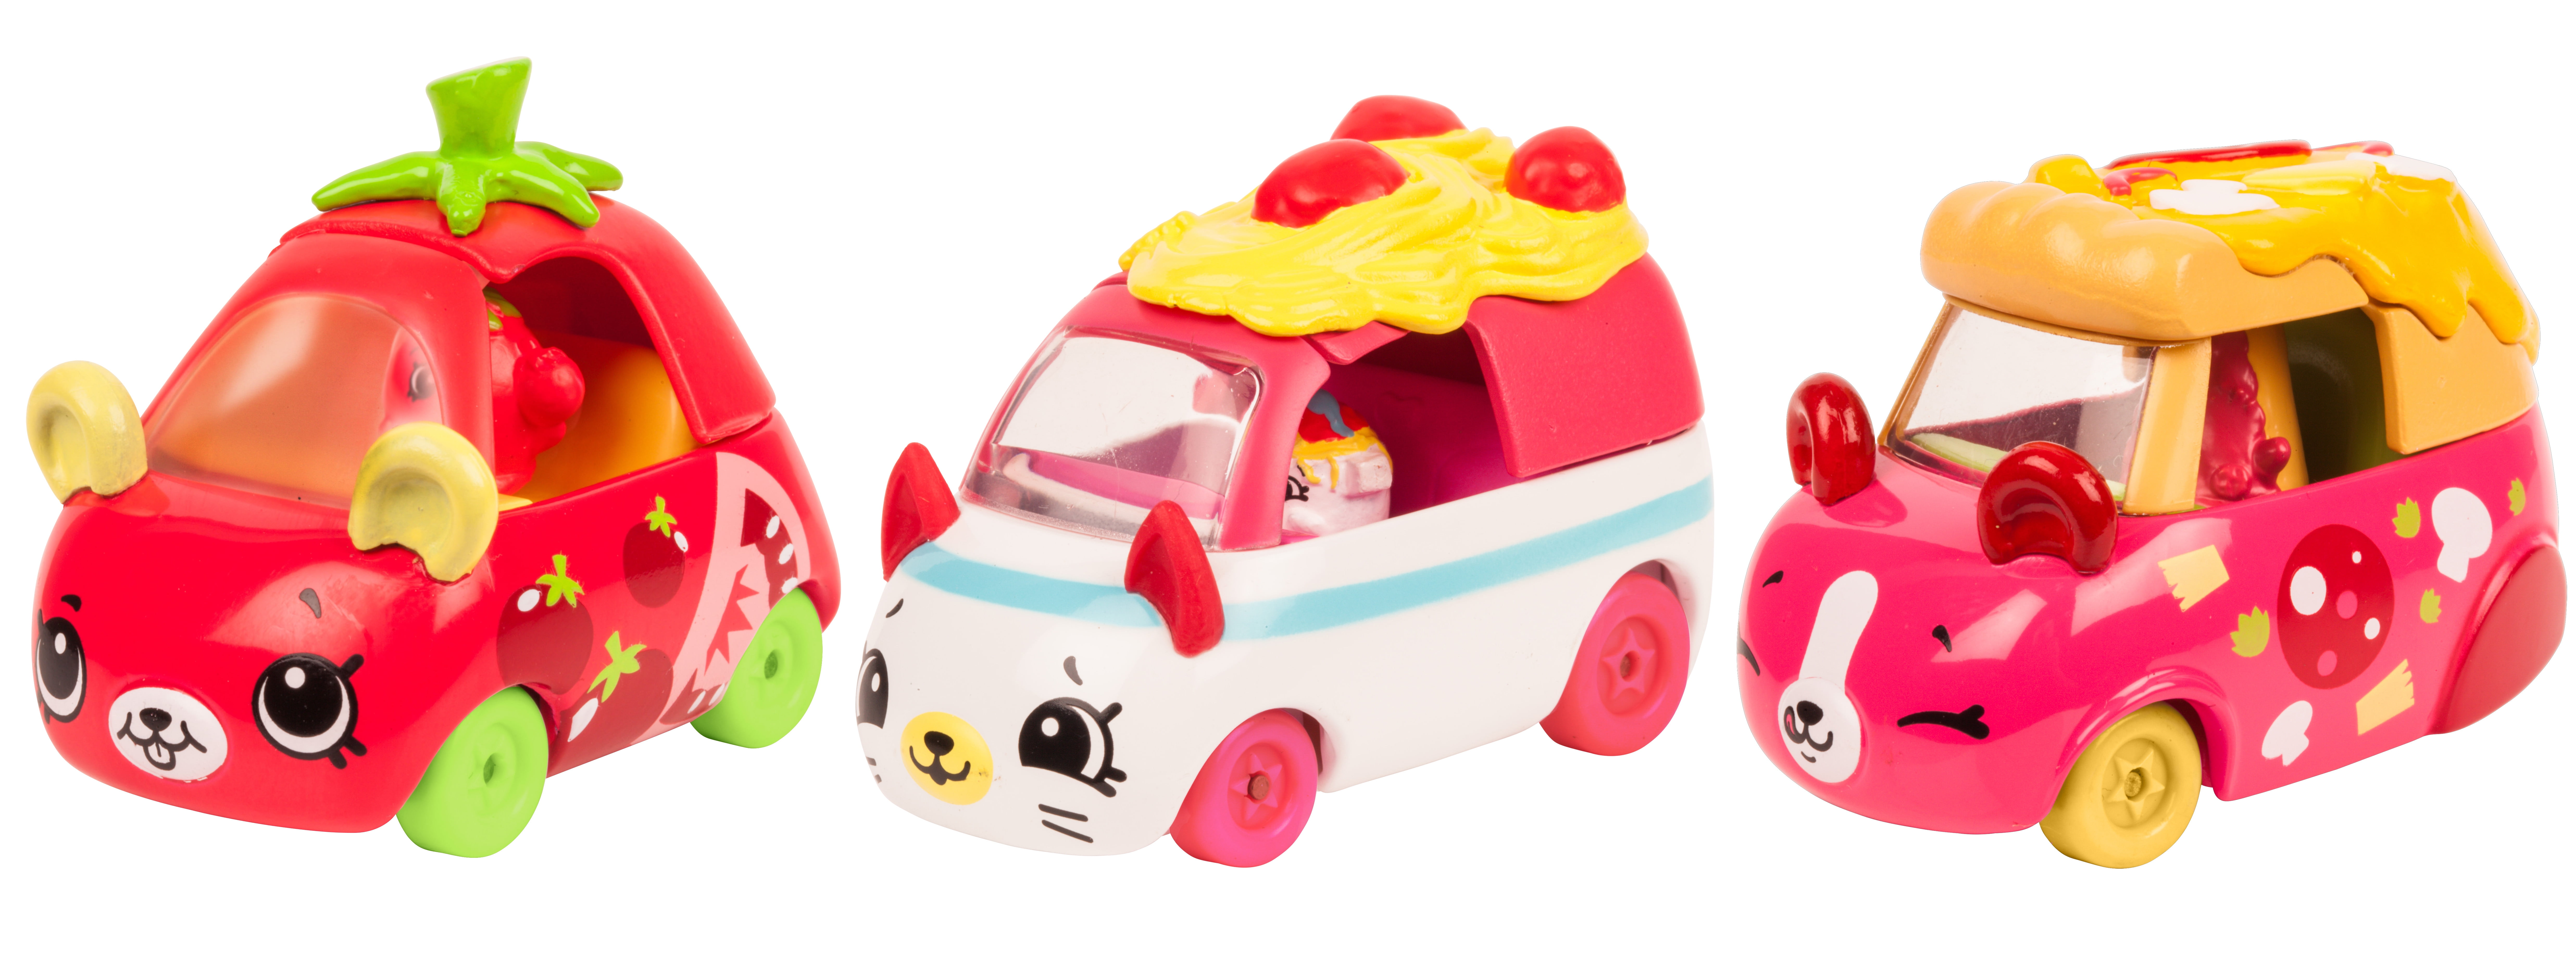 NEW Shopkins Cutie Cars 3 Pack Series 3 Moto Italiano Coll Exclusive Collection 